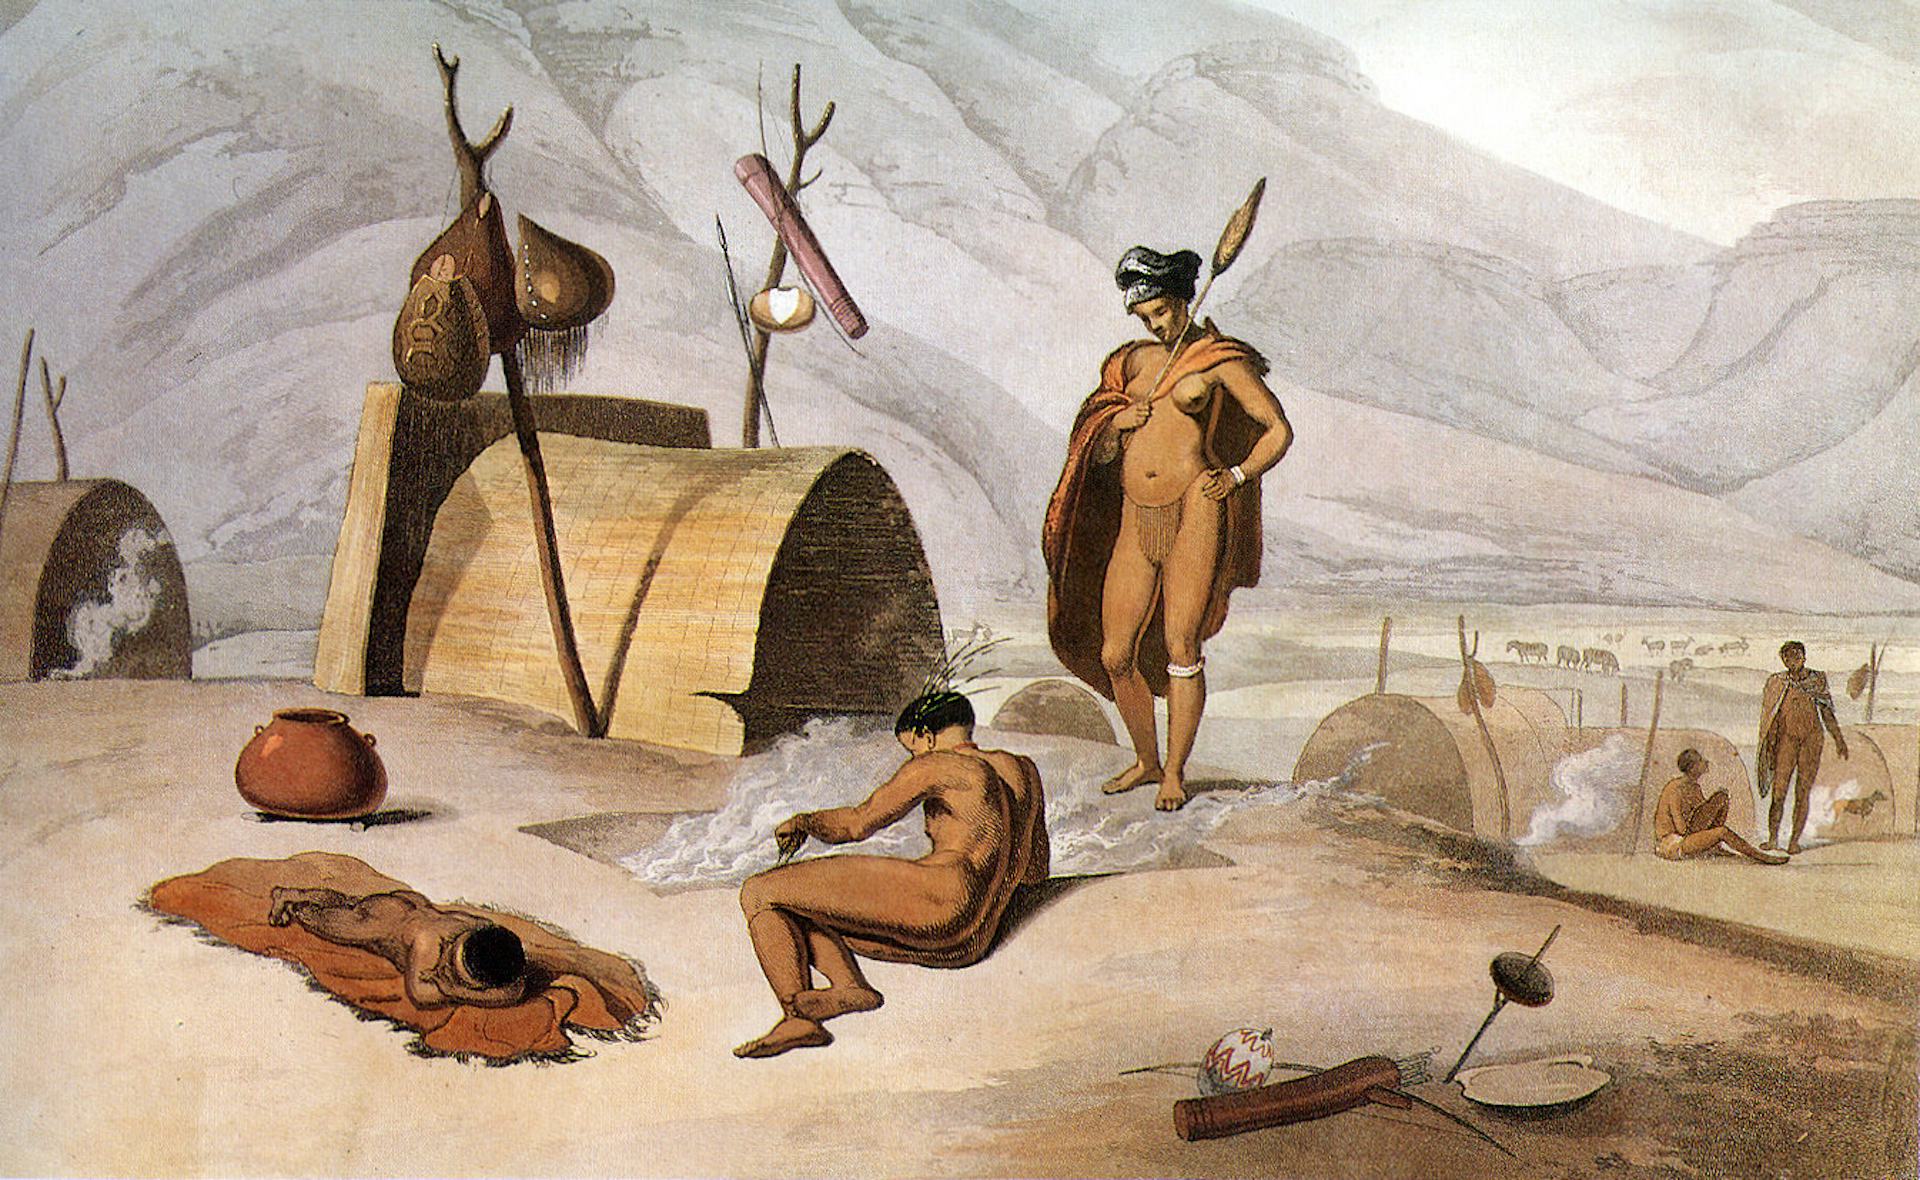 Khoisan engaged in roasting grasshoppers on grills, by Samuel Daniell (1805).